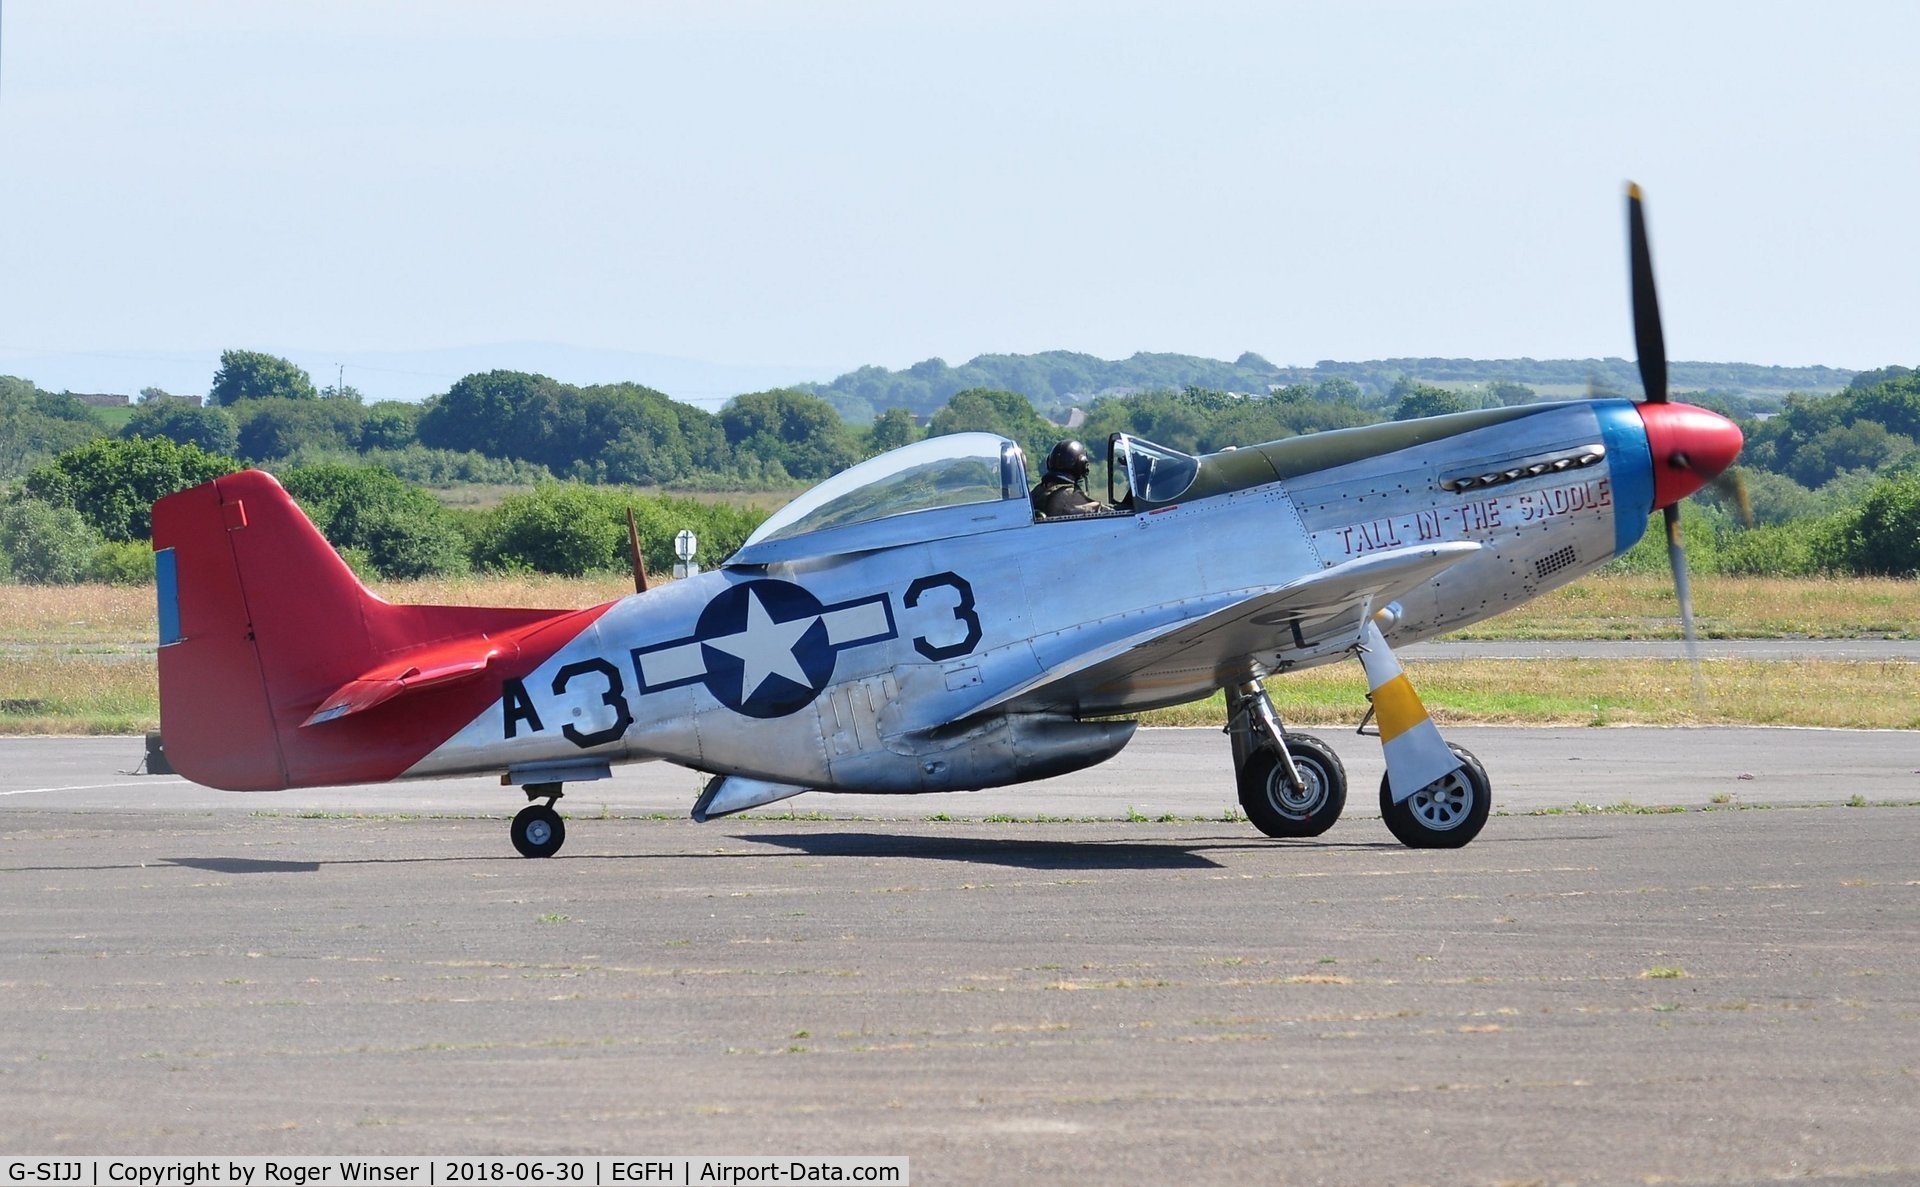 G-SIJJ, 1944 North American P-51D Mustang C/N 122-31894 (44-72035), TALL IN THE SADDLE.